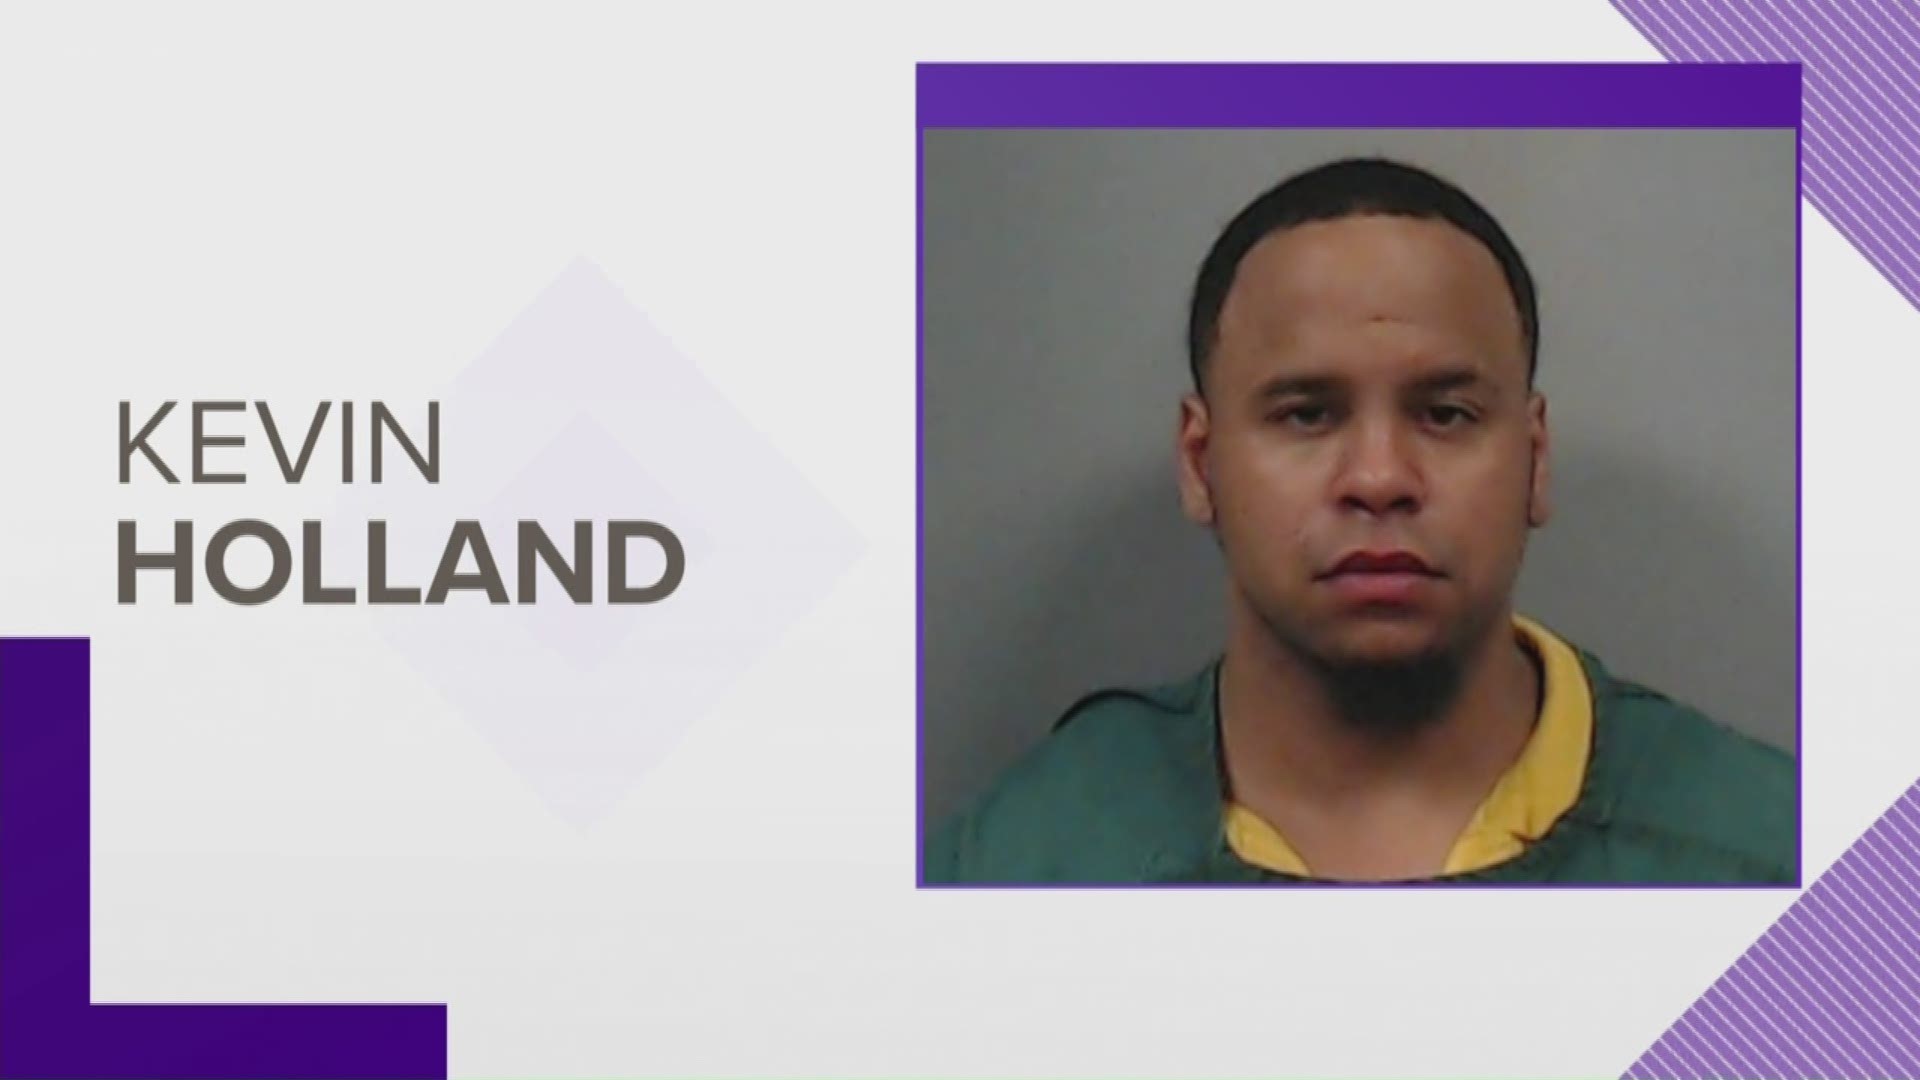 Kevin Holland, 25, has been arrested in the shooting death of Jared Singley, 38.